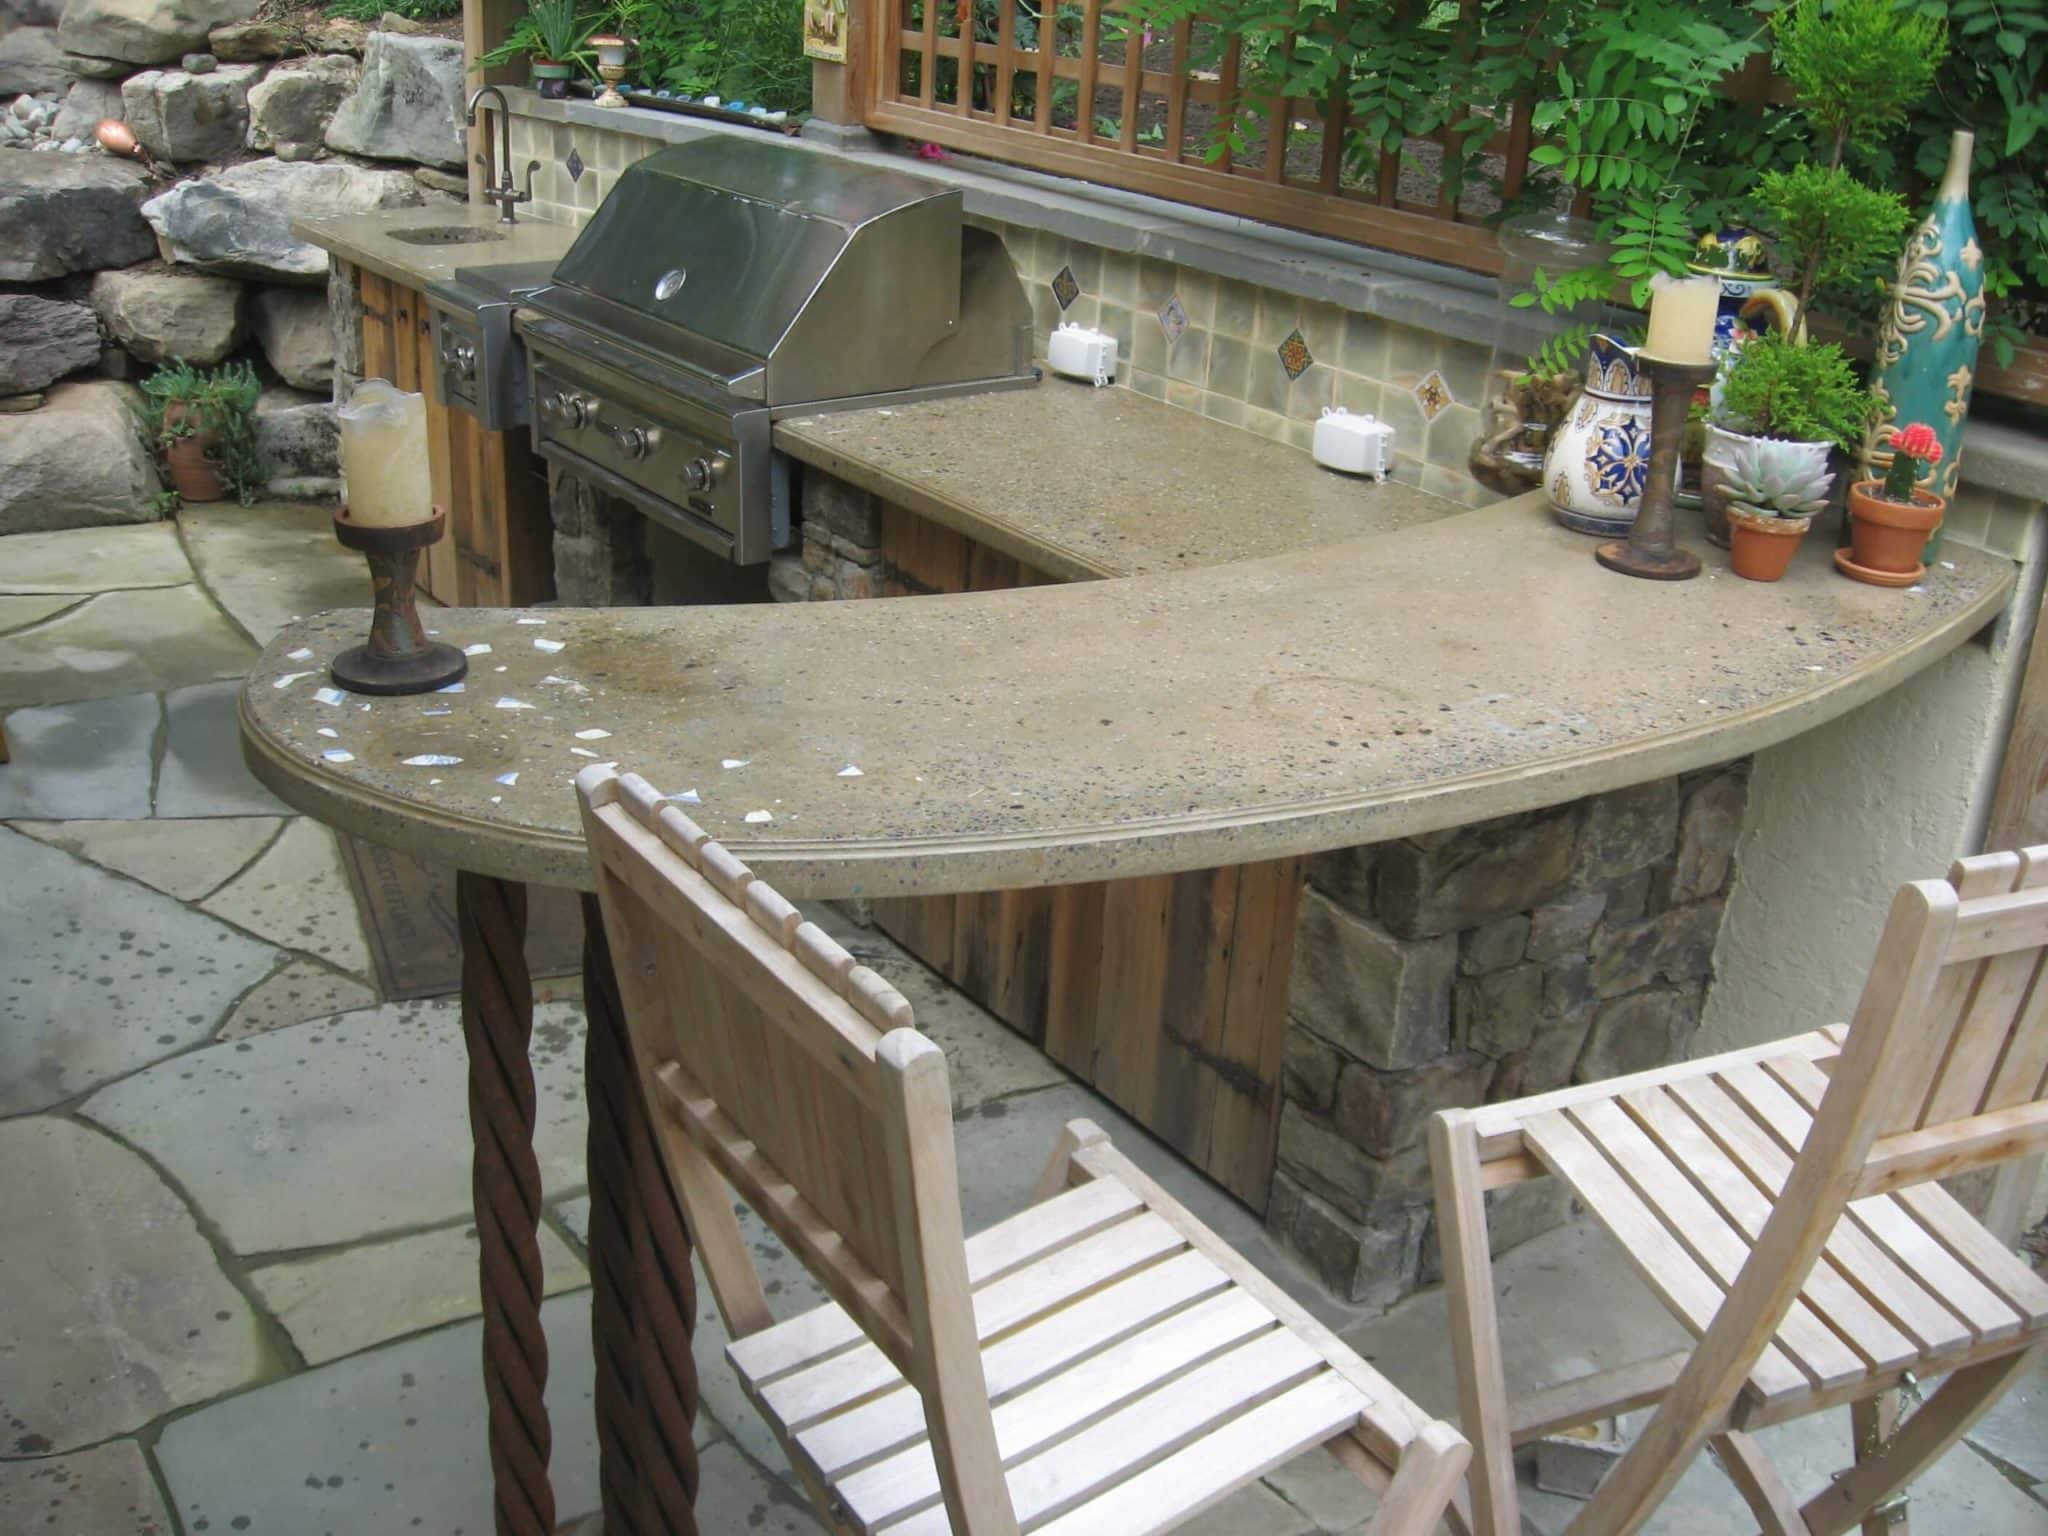 16 Outdoor Kitchen Area with Concrete Countertop, Stone Walls and Retaining Boulders with Urn Water Feature